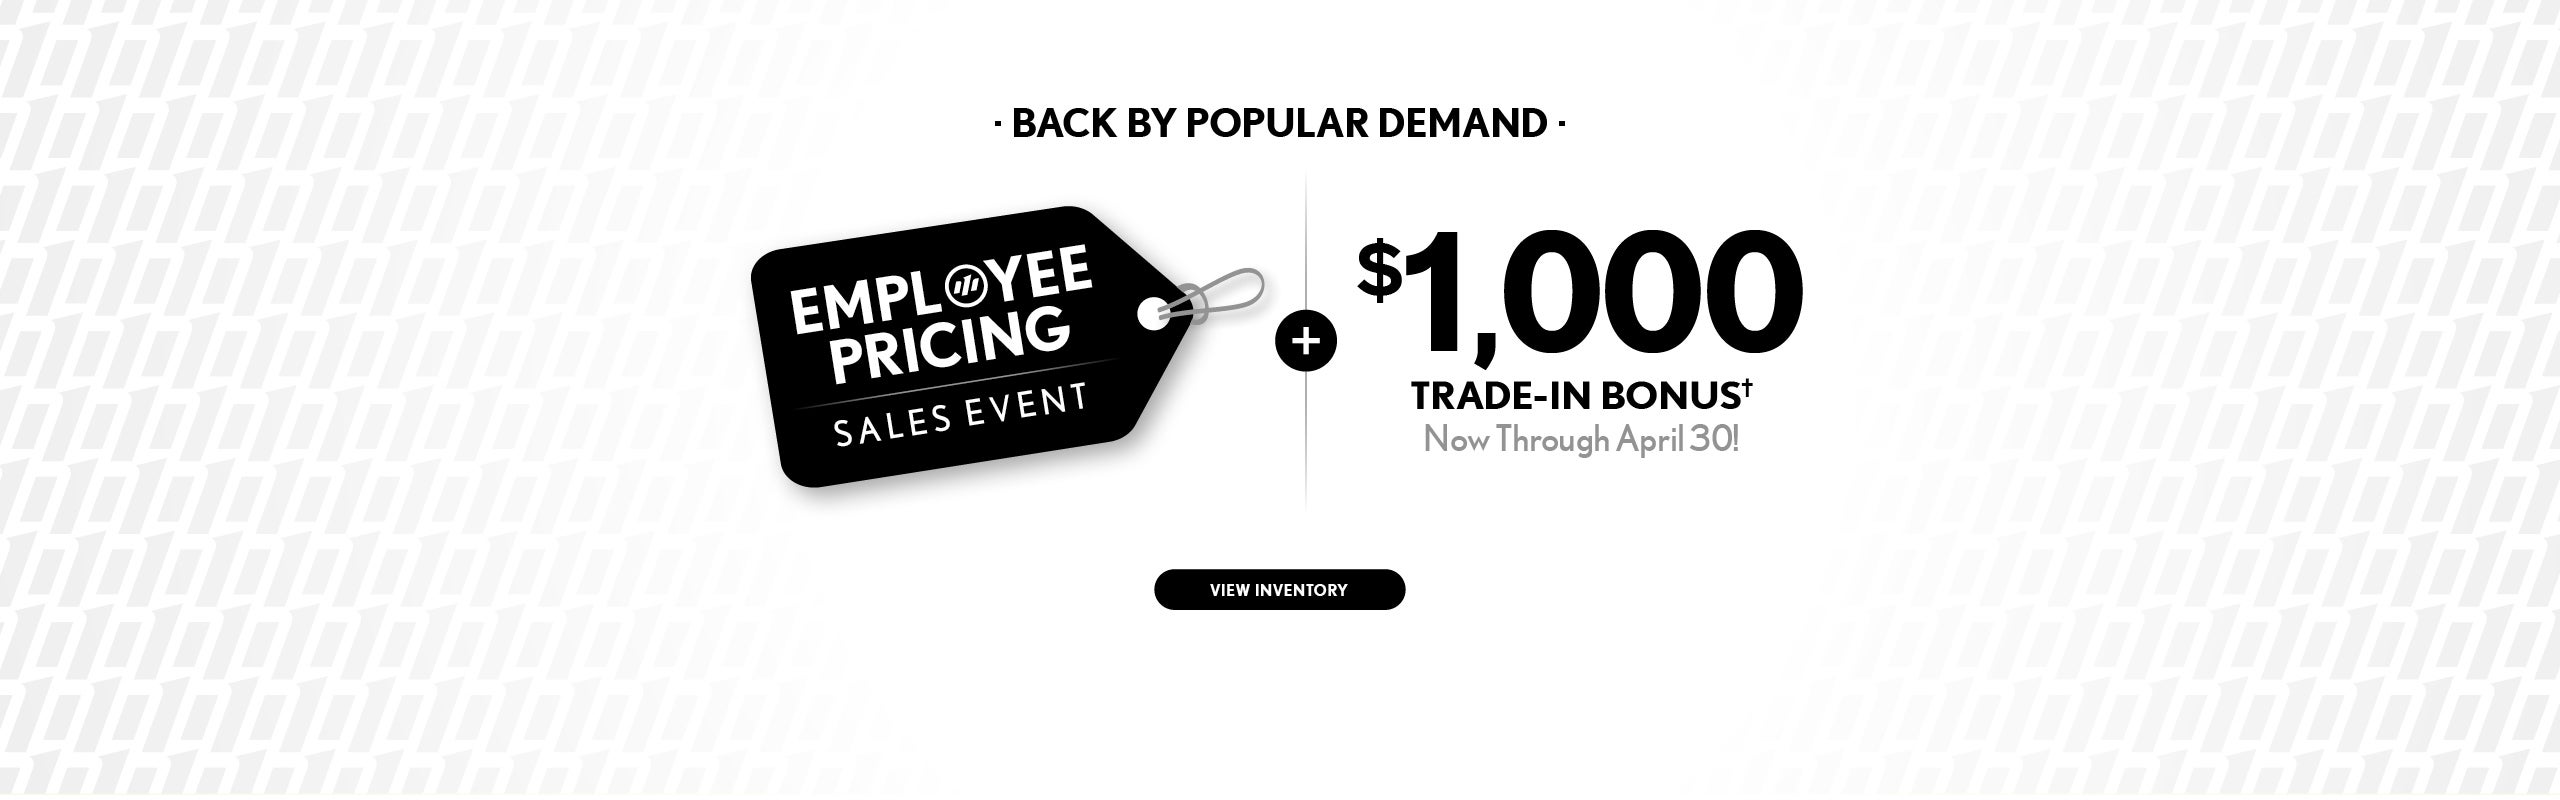 Employee Pricing Sales Event